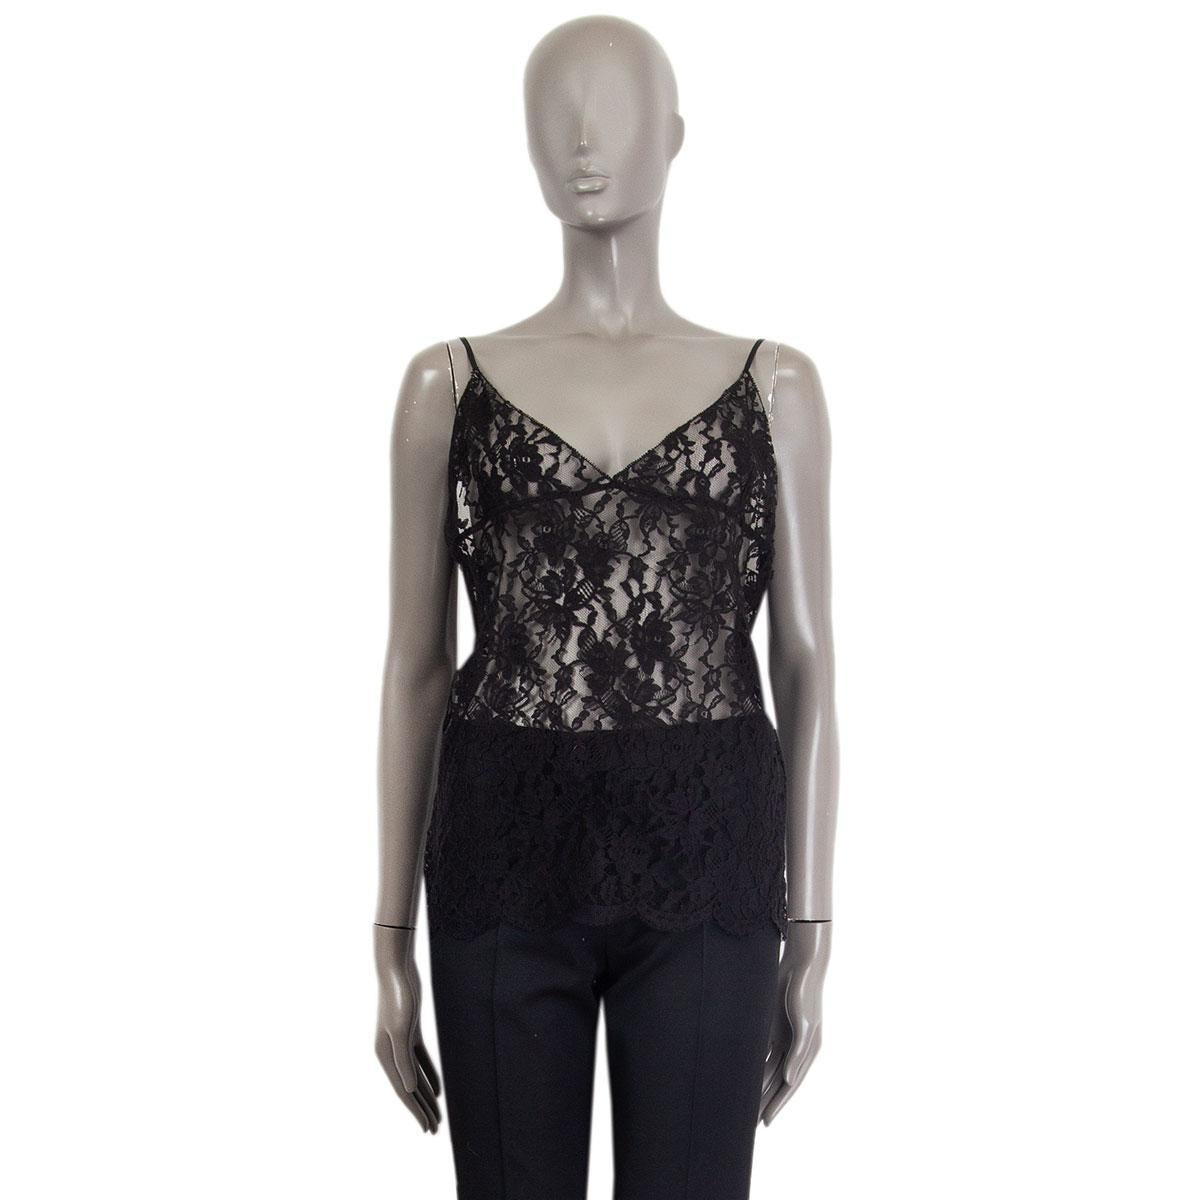 100% authentic Saint Laurent camisole top in sheer black lace (silk 100%). Has adjustable spaghetti straps. Has been worn and is in excellent condition. 

Measurements
Tag Size	Missing Tag (M/L)
Size	M
Bust To	90cm (35.1in)
Waist To	90cm